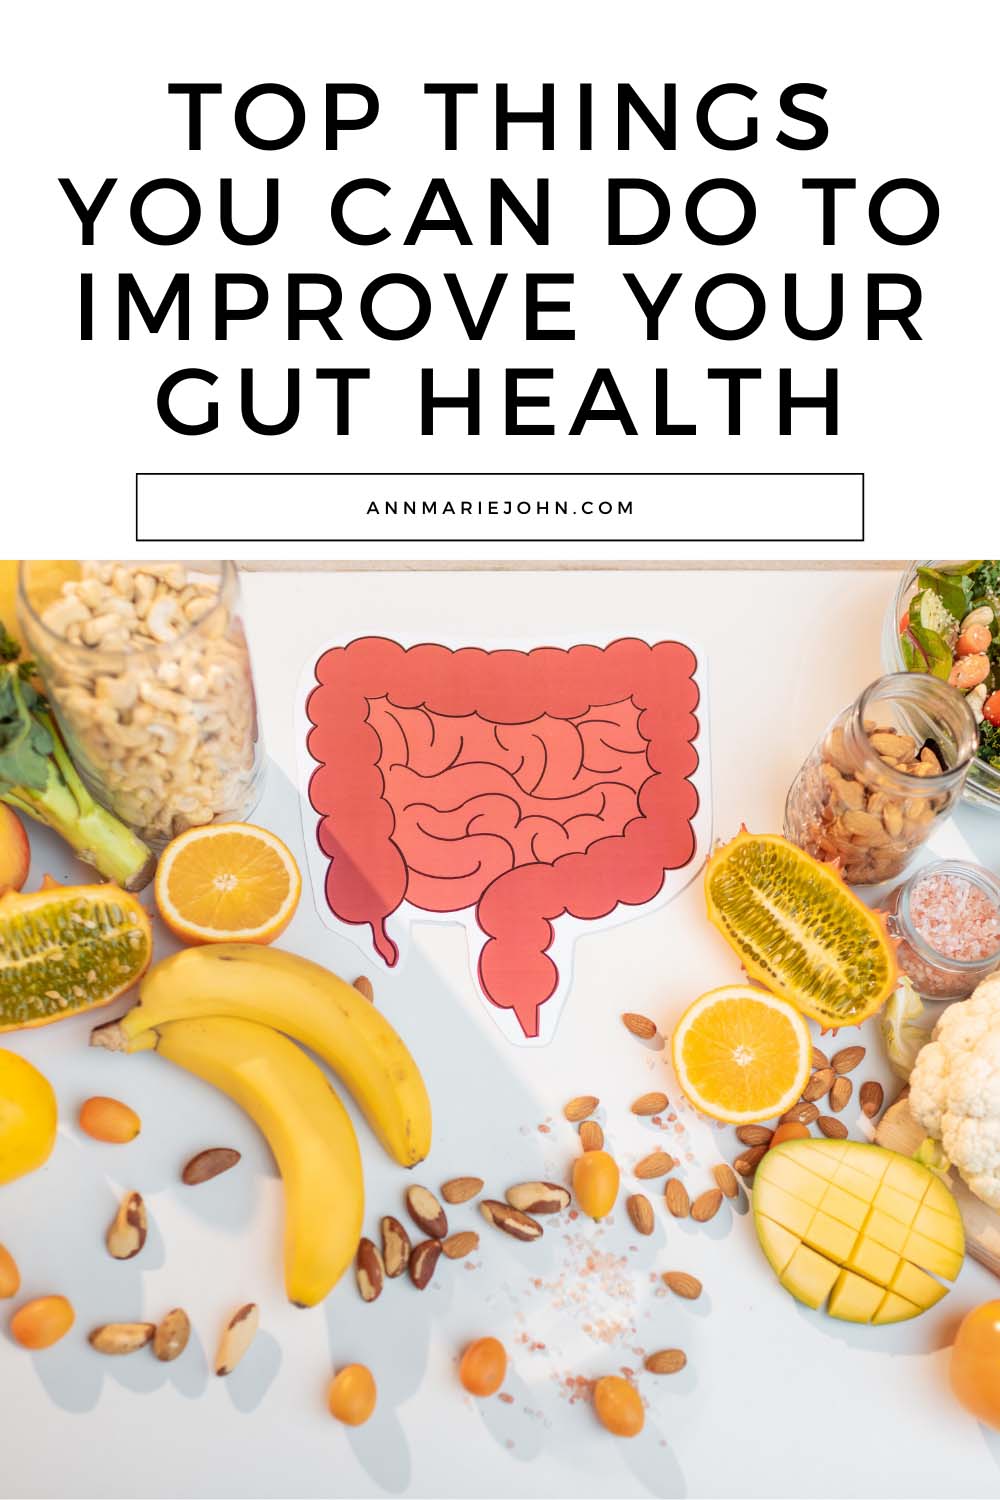 Top Things You Can Do to Improve Your Gut Health